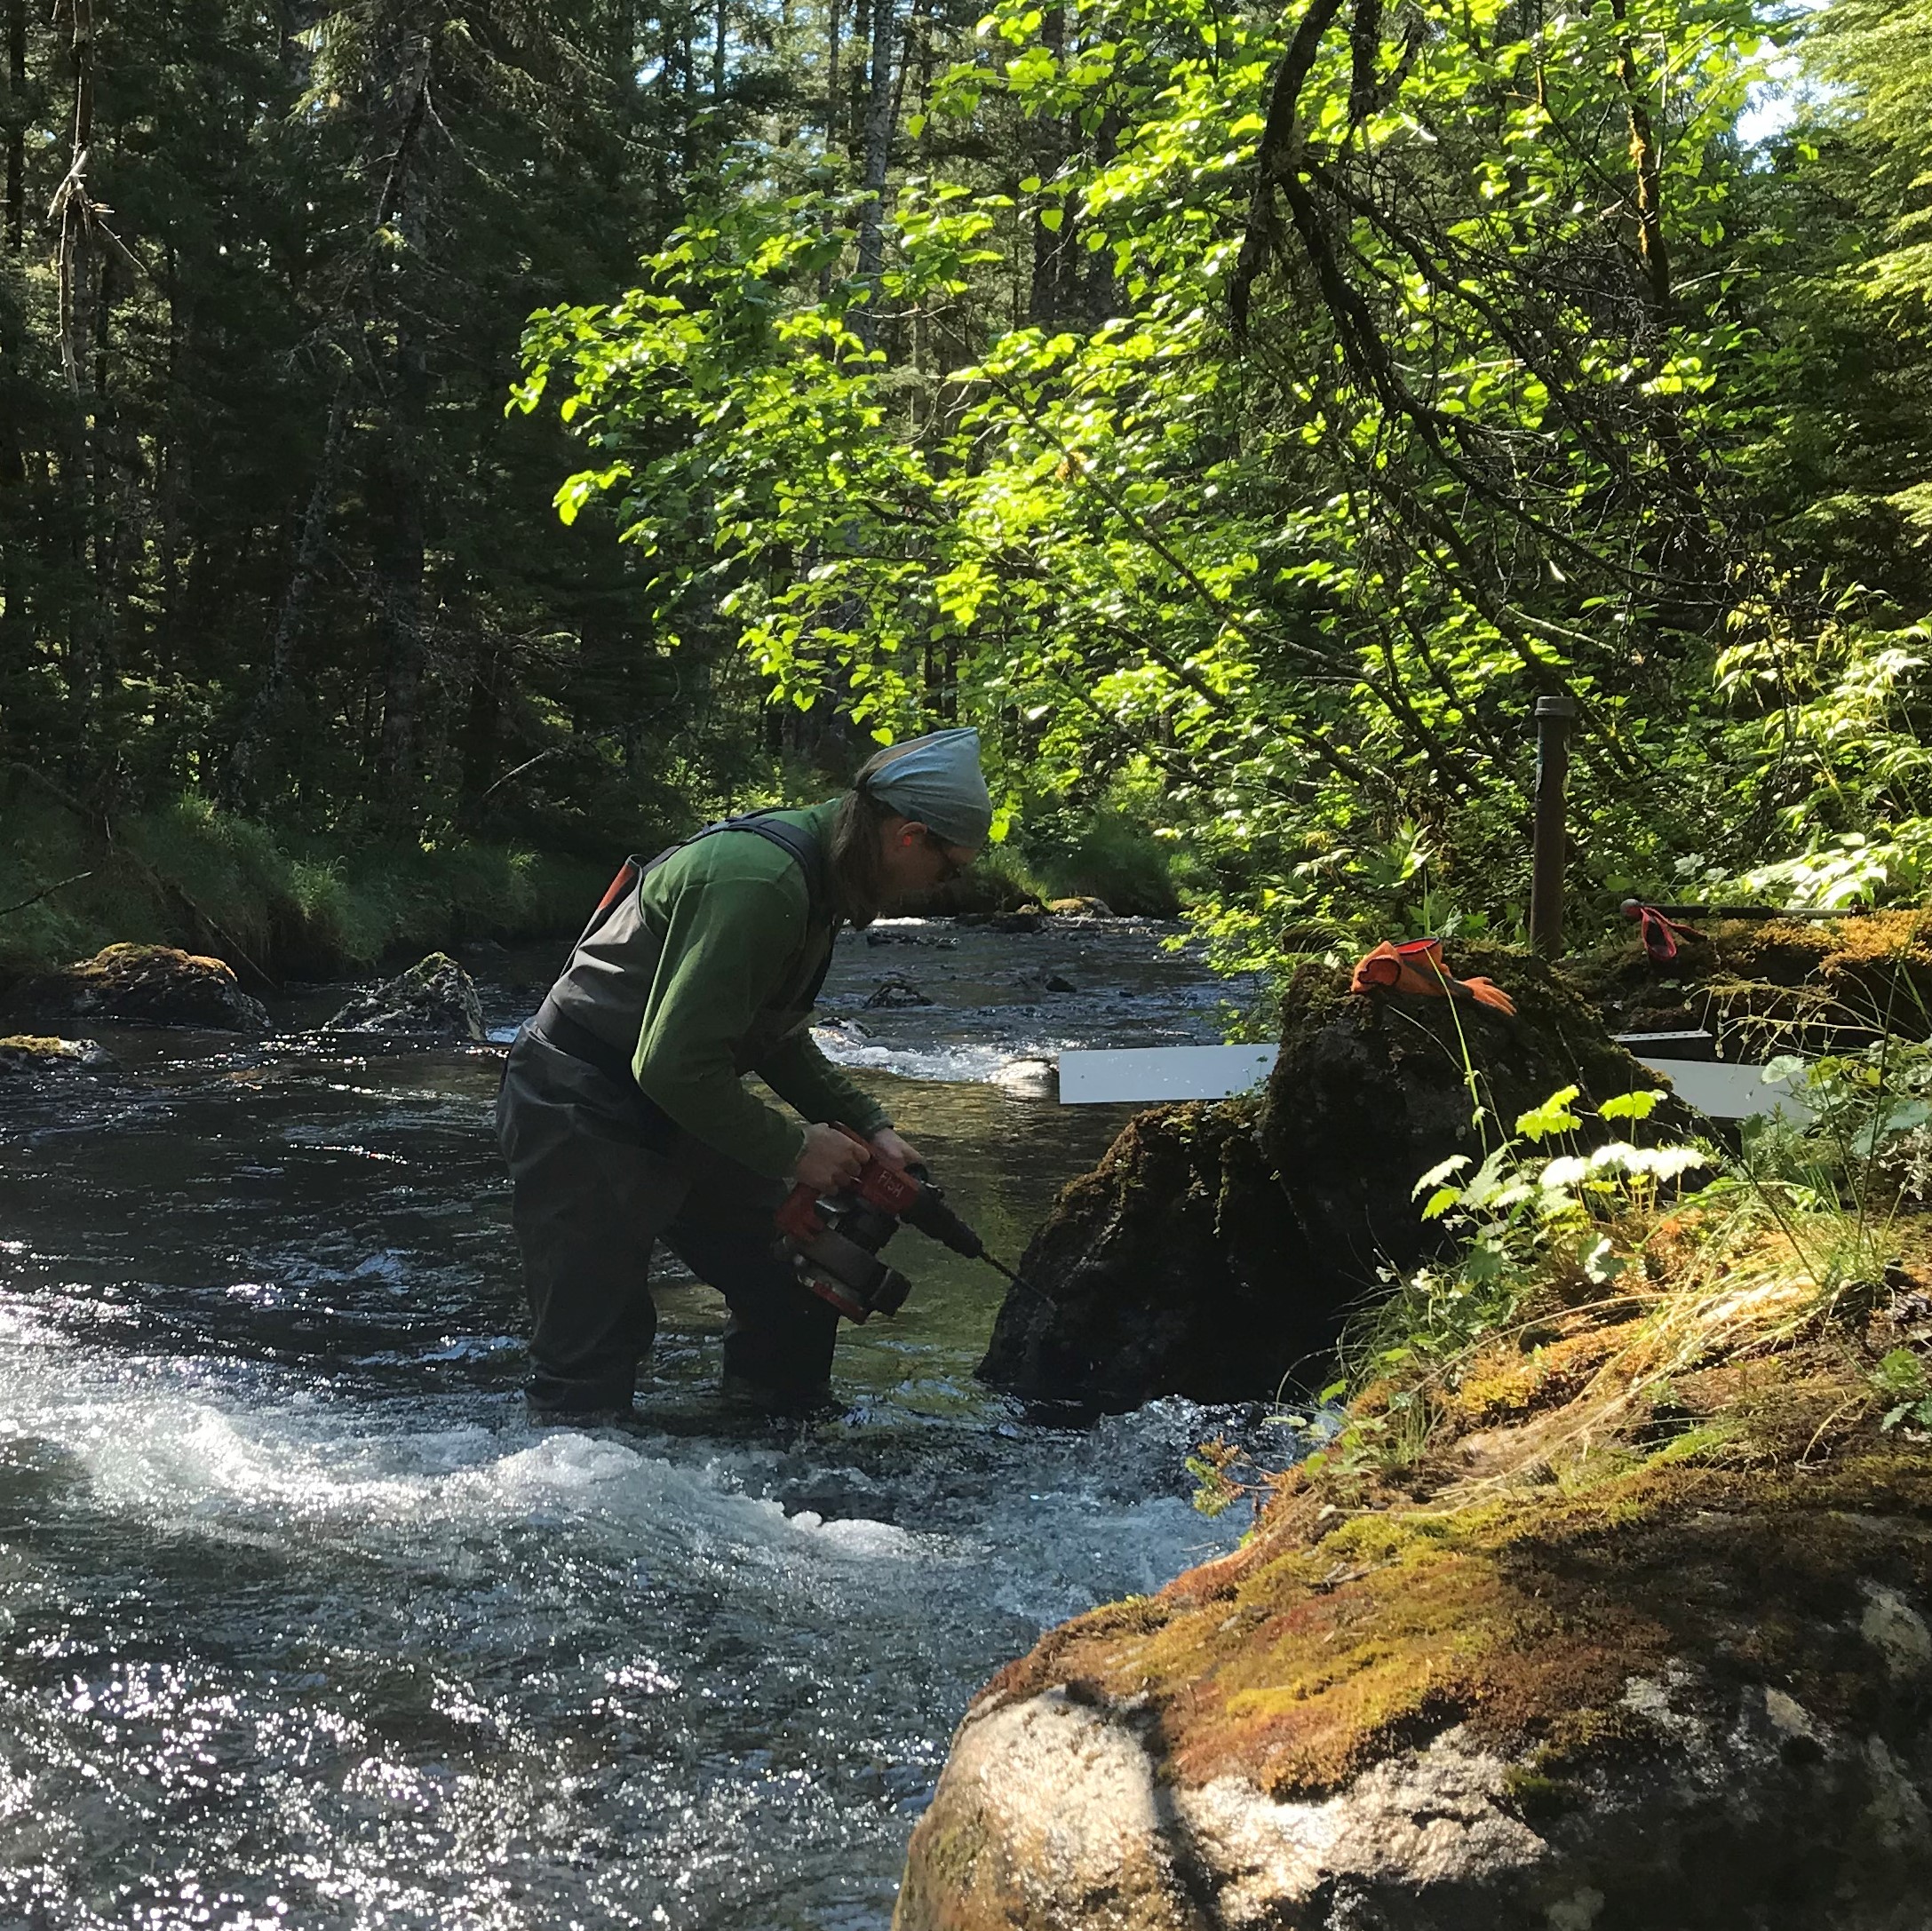 WRS student Dean Anderson is standing in a fast paced river with a drill next to a stone. He is drilling a measuring device into the rock.